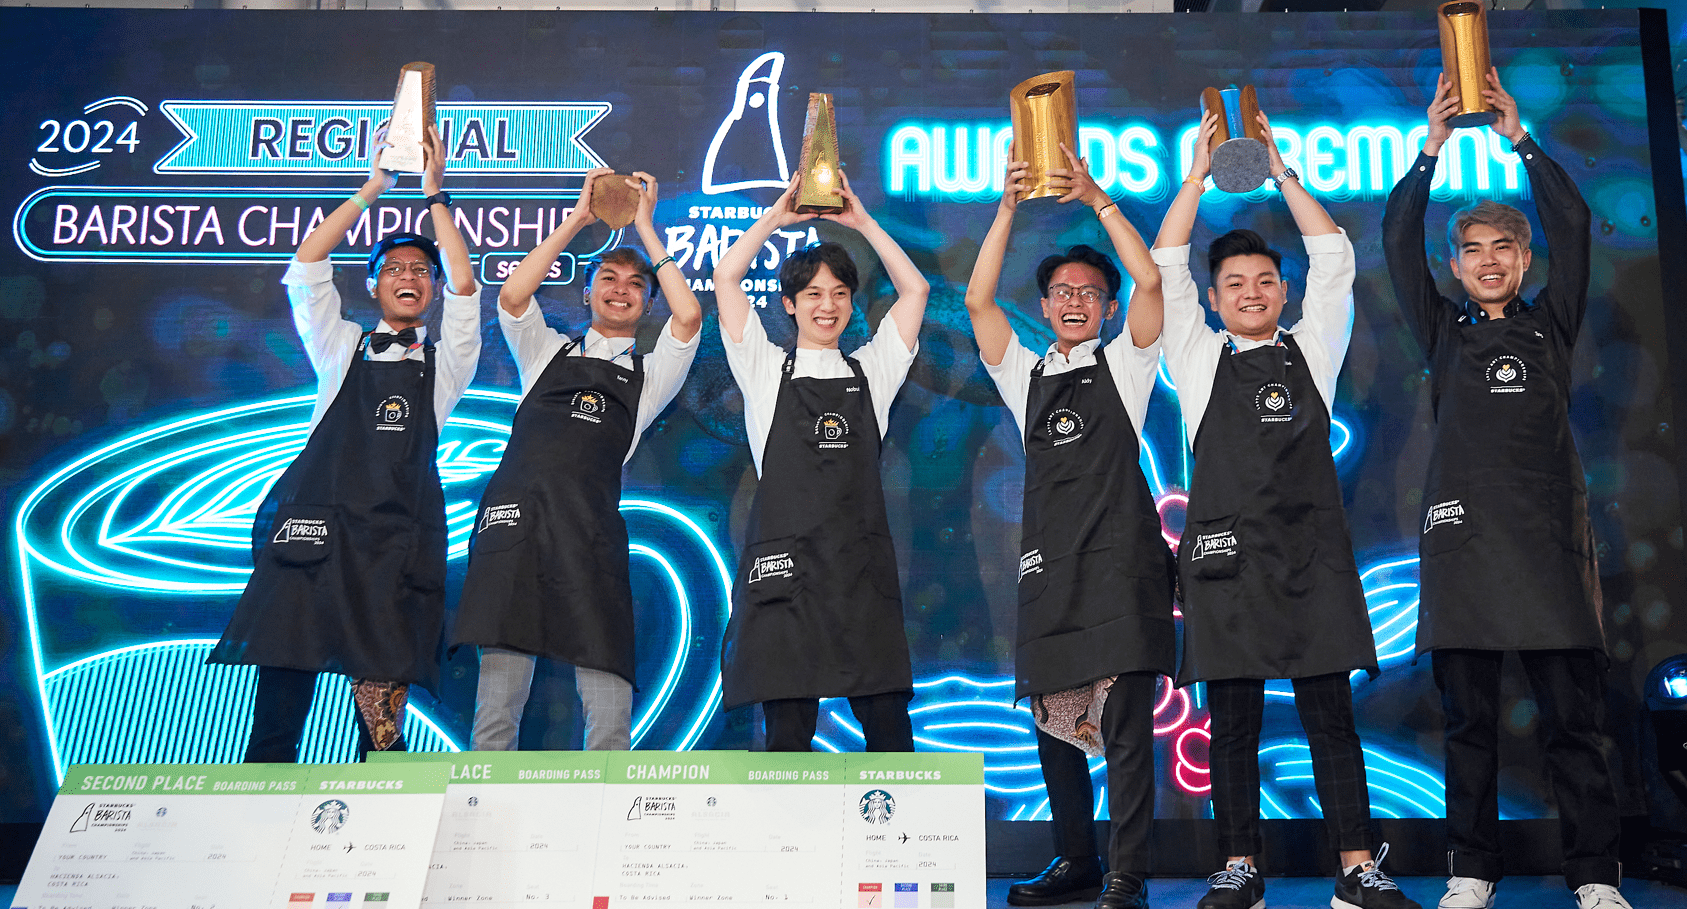 Starbucks Indonesia Top Baristas Bring Sweet Victory at the Asia Pacific Regional Barista Championships 2024 in Hong Kong